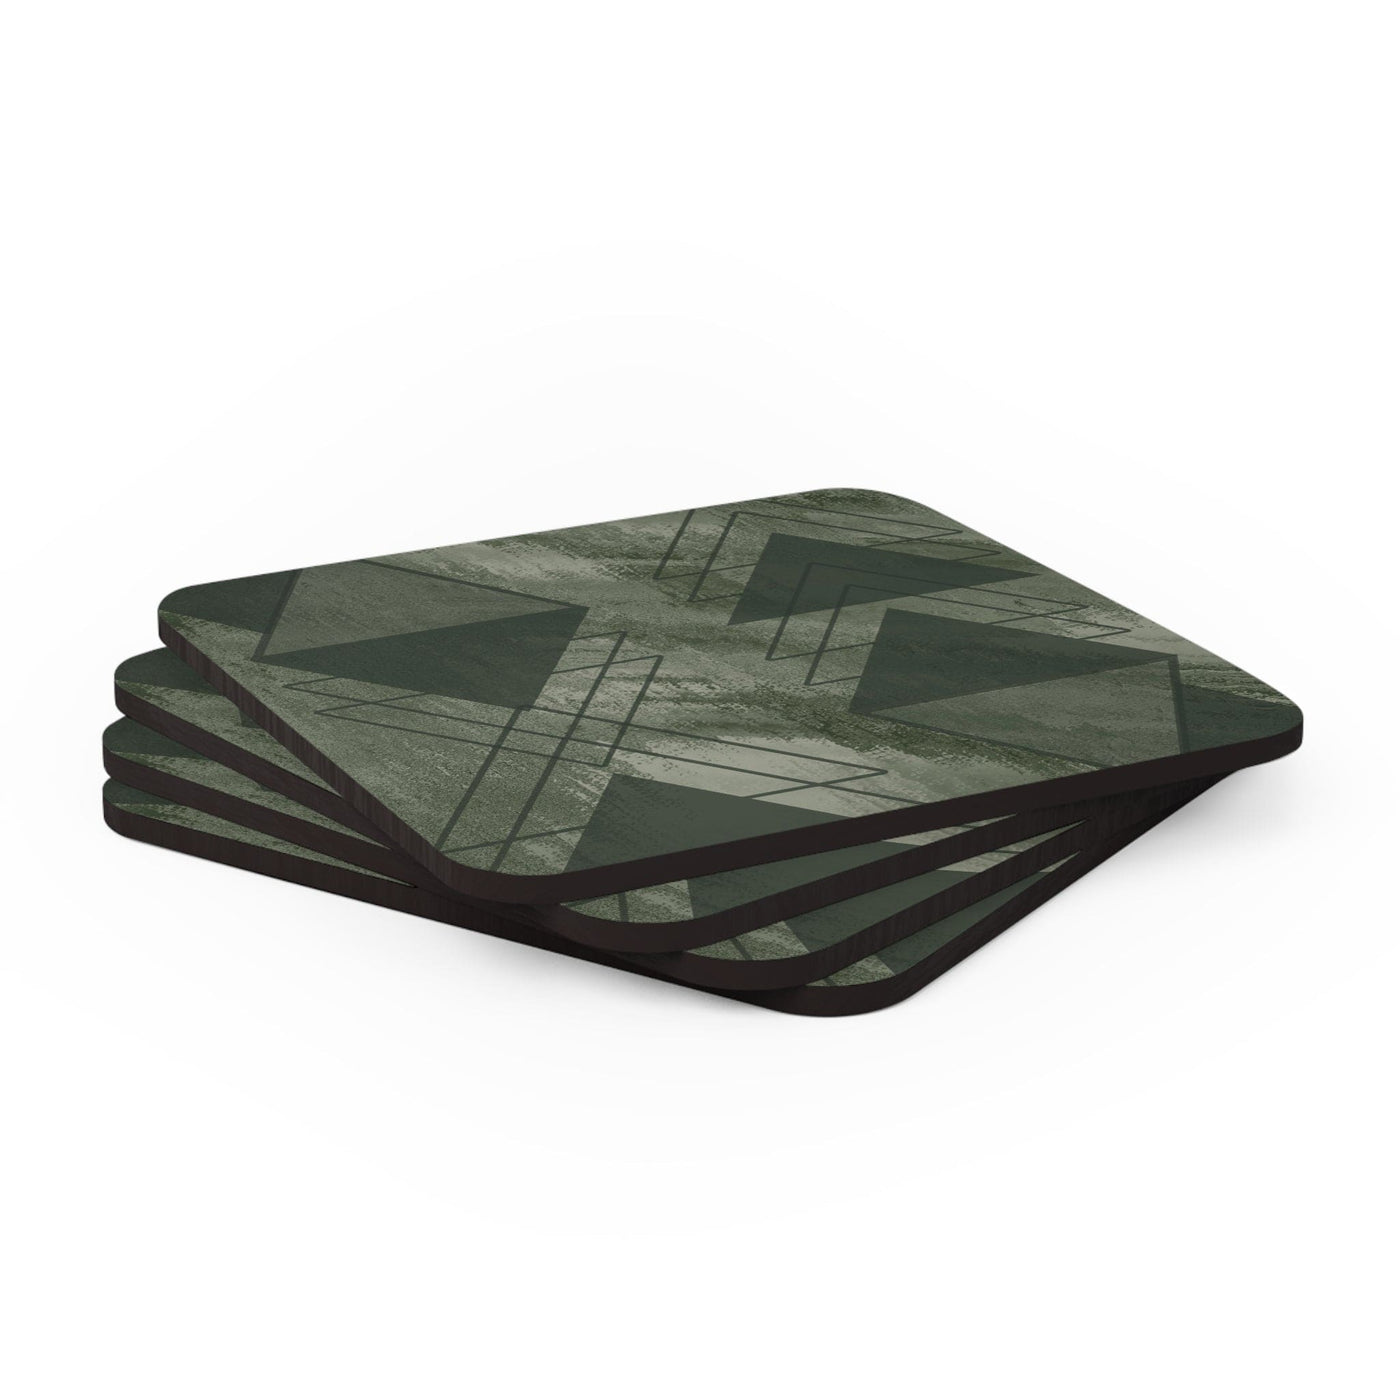 Coaster Set Of 4 For Drinks Olive Green Triangular Colorblock - Decorative